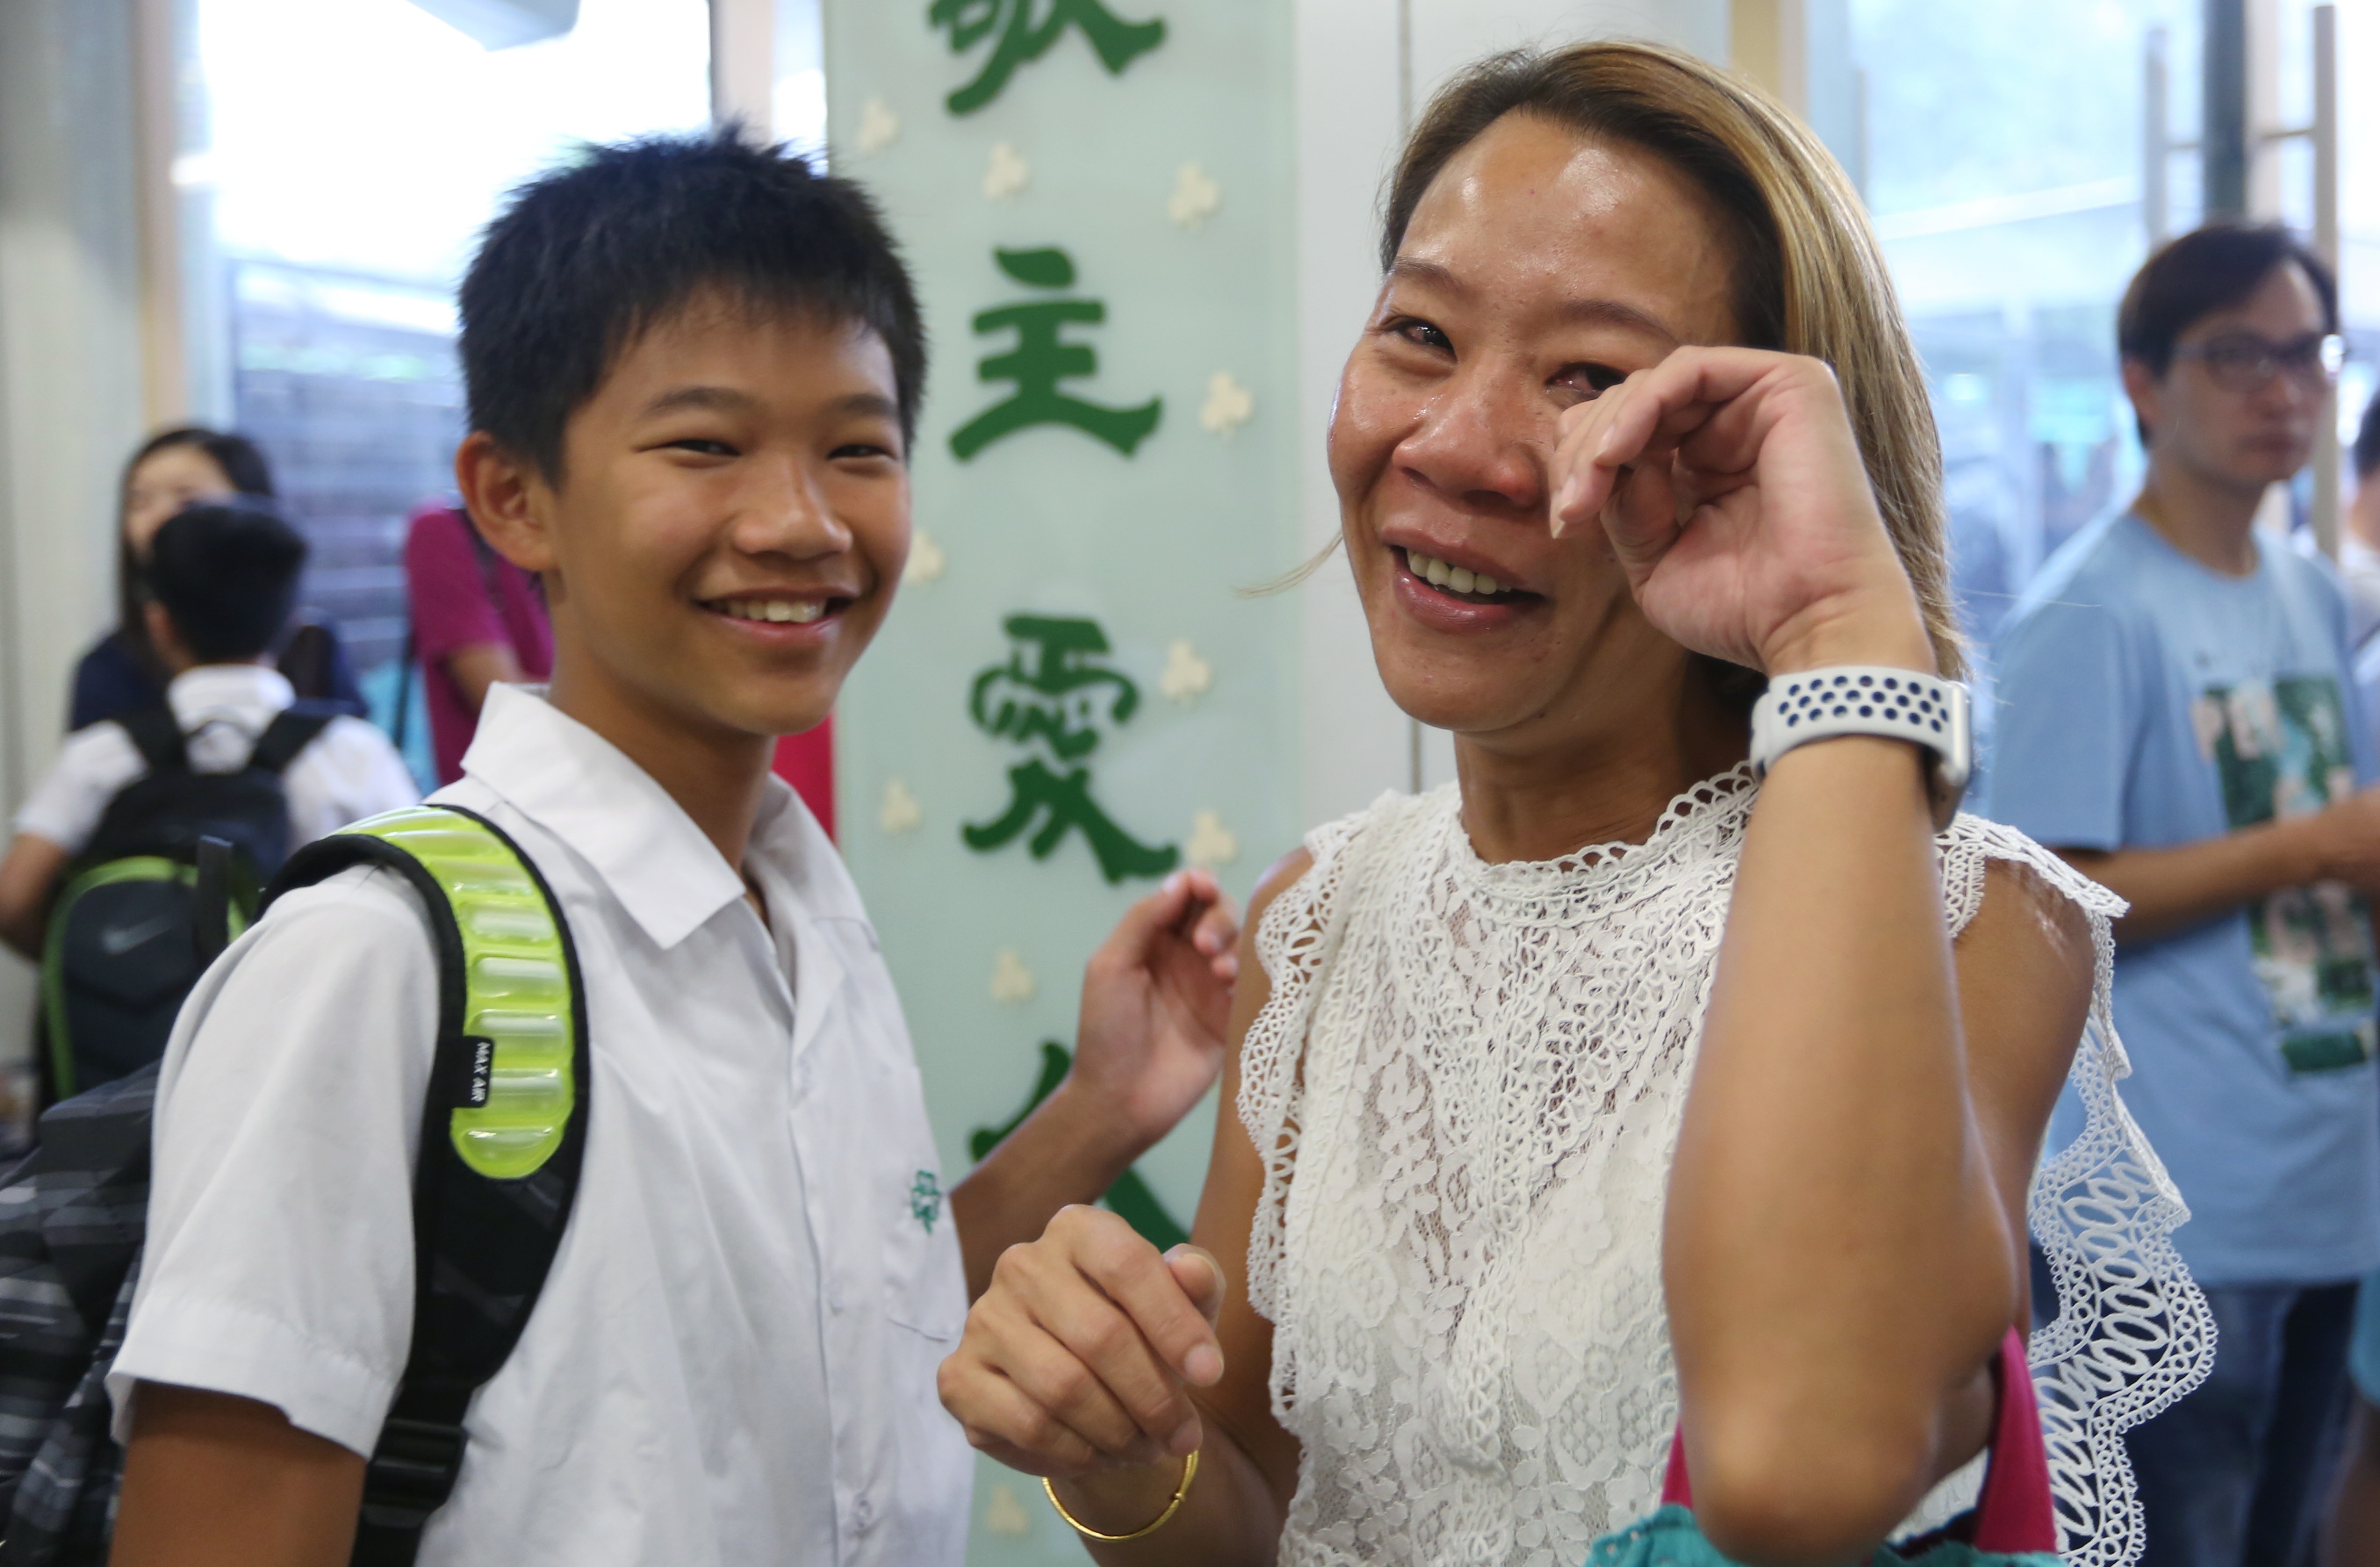 Cheng Suk-fan (right) cries tears of joy after discovering her son Yuen Pak-ngai, 12, has been accepted by Choi Hung Catholic Secondary school, his first choice. Photo: Xiaomei Chen